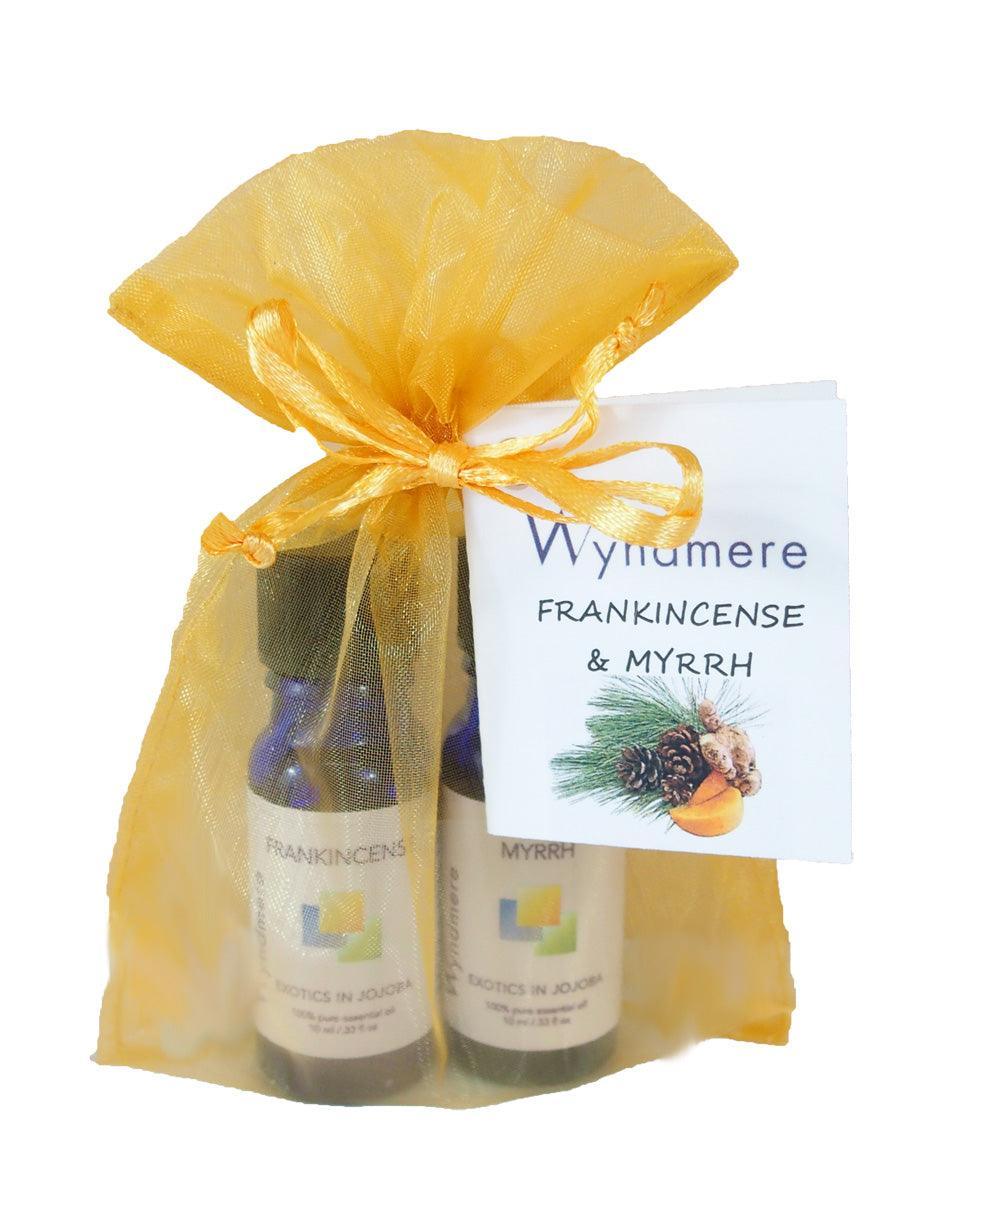 Frankincense and Myrrh essential oils in a gold organza bag for holiday gift giving